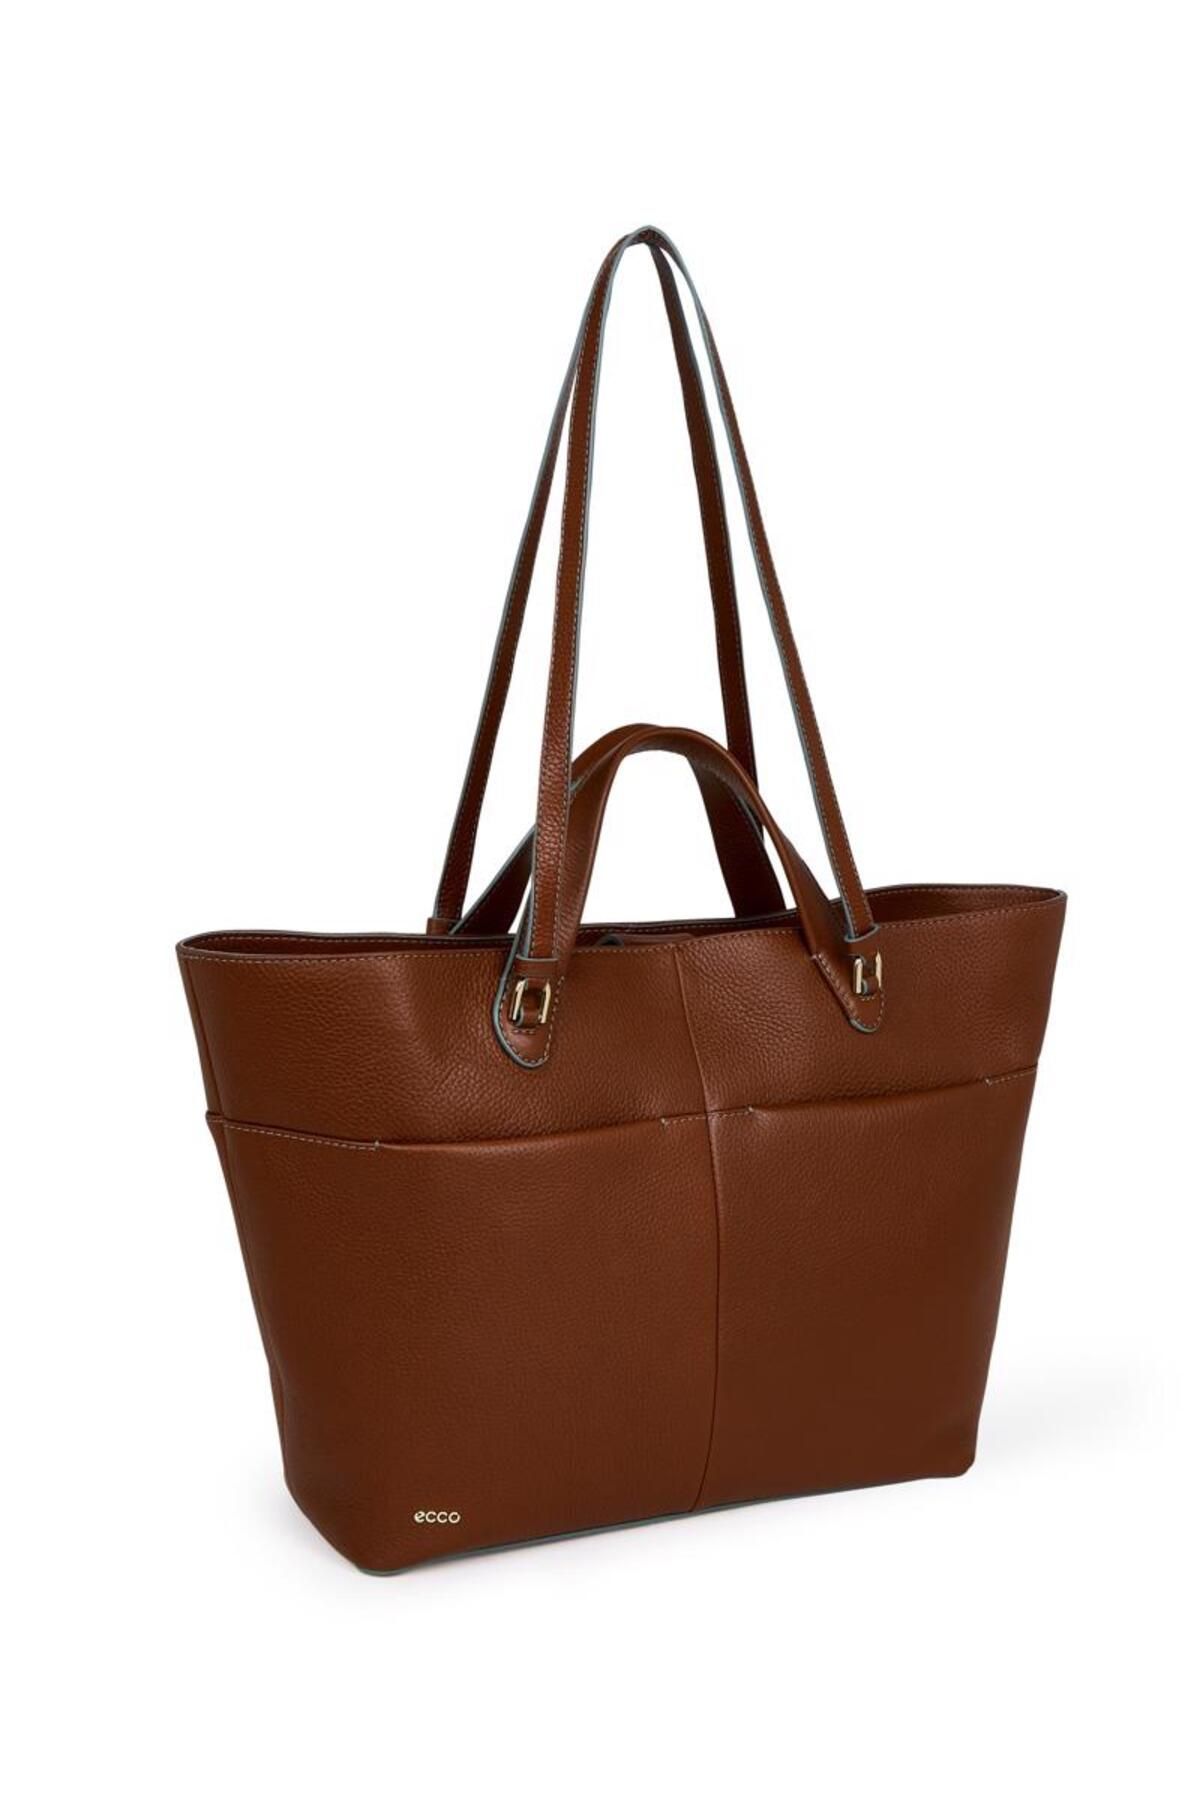 Ecco Tote M Pebbled Leather